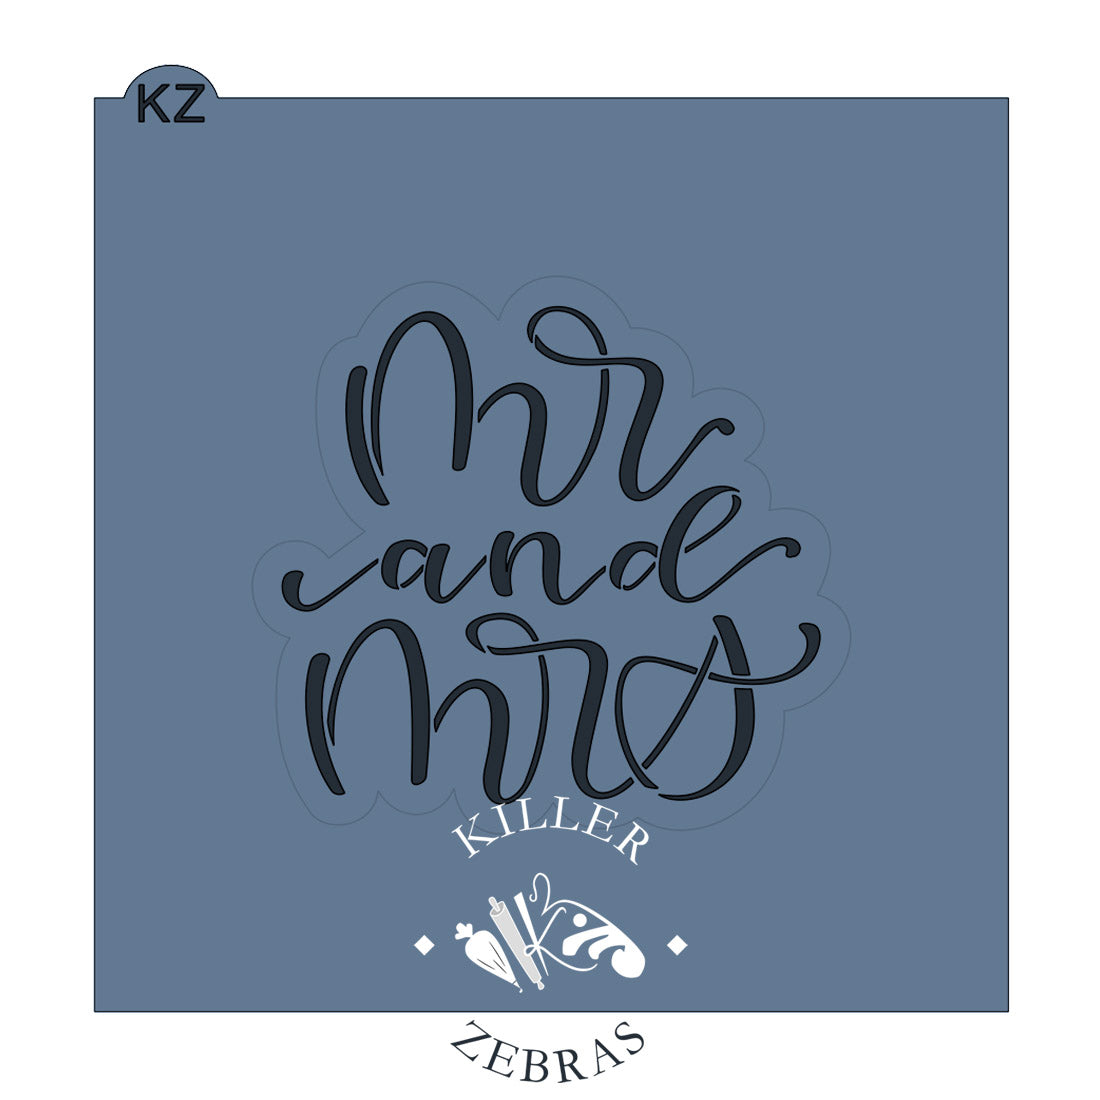 Mr. & Mrs. Hand Lettered (Style 3)